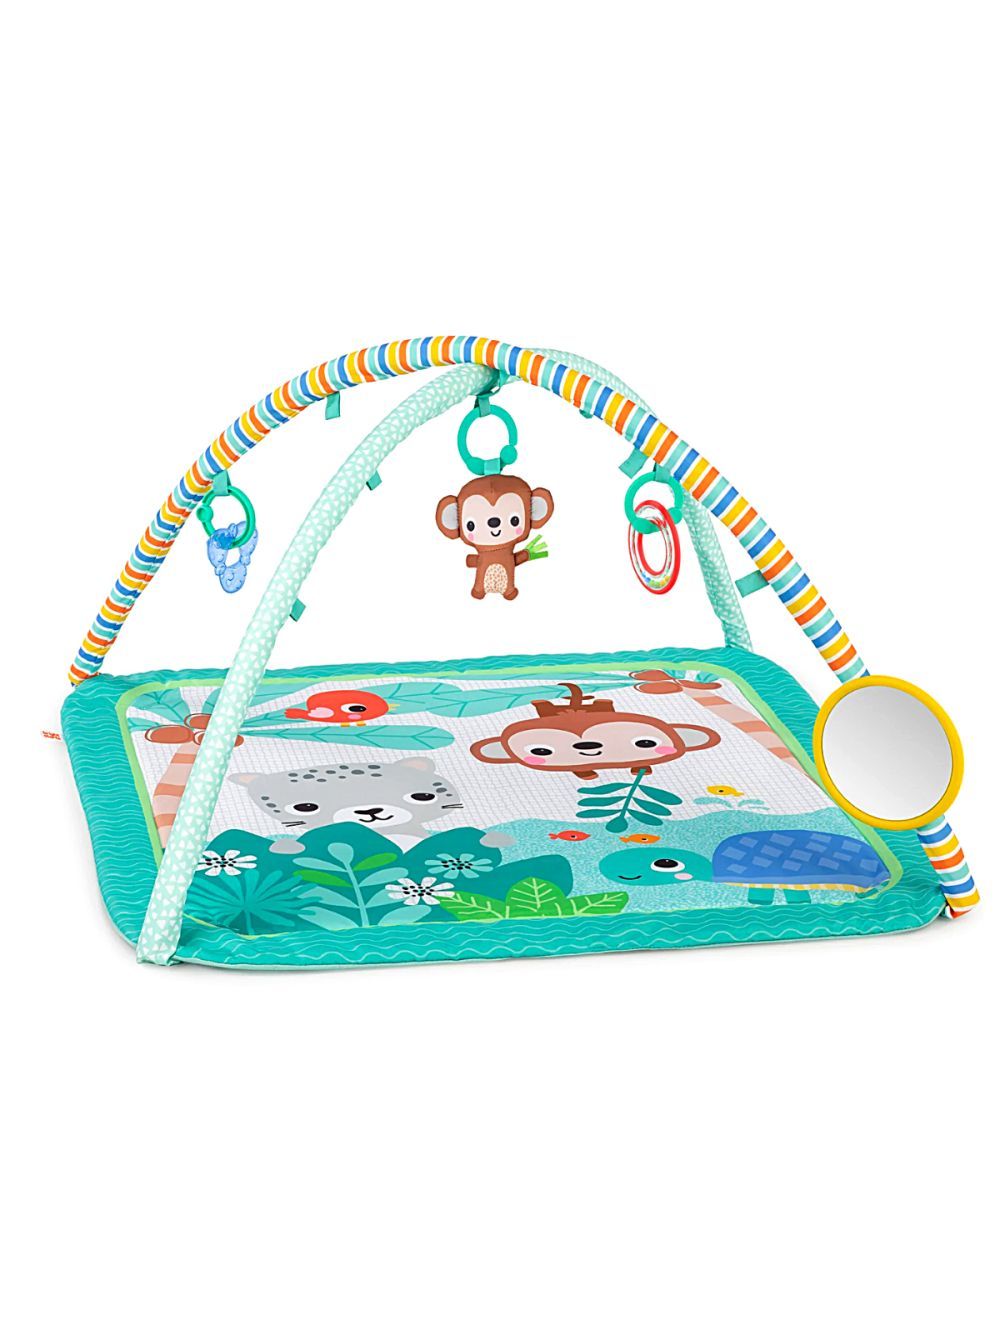 Play Gym, Baby Gym, Play Mat, Activity Gym